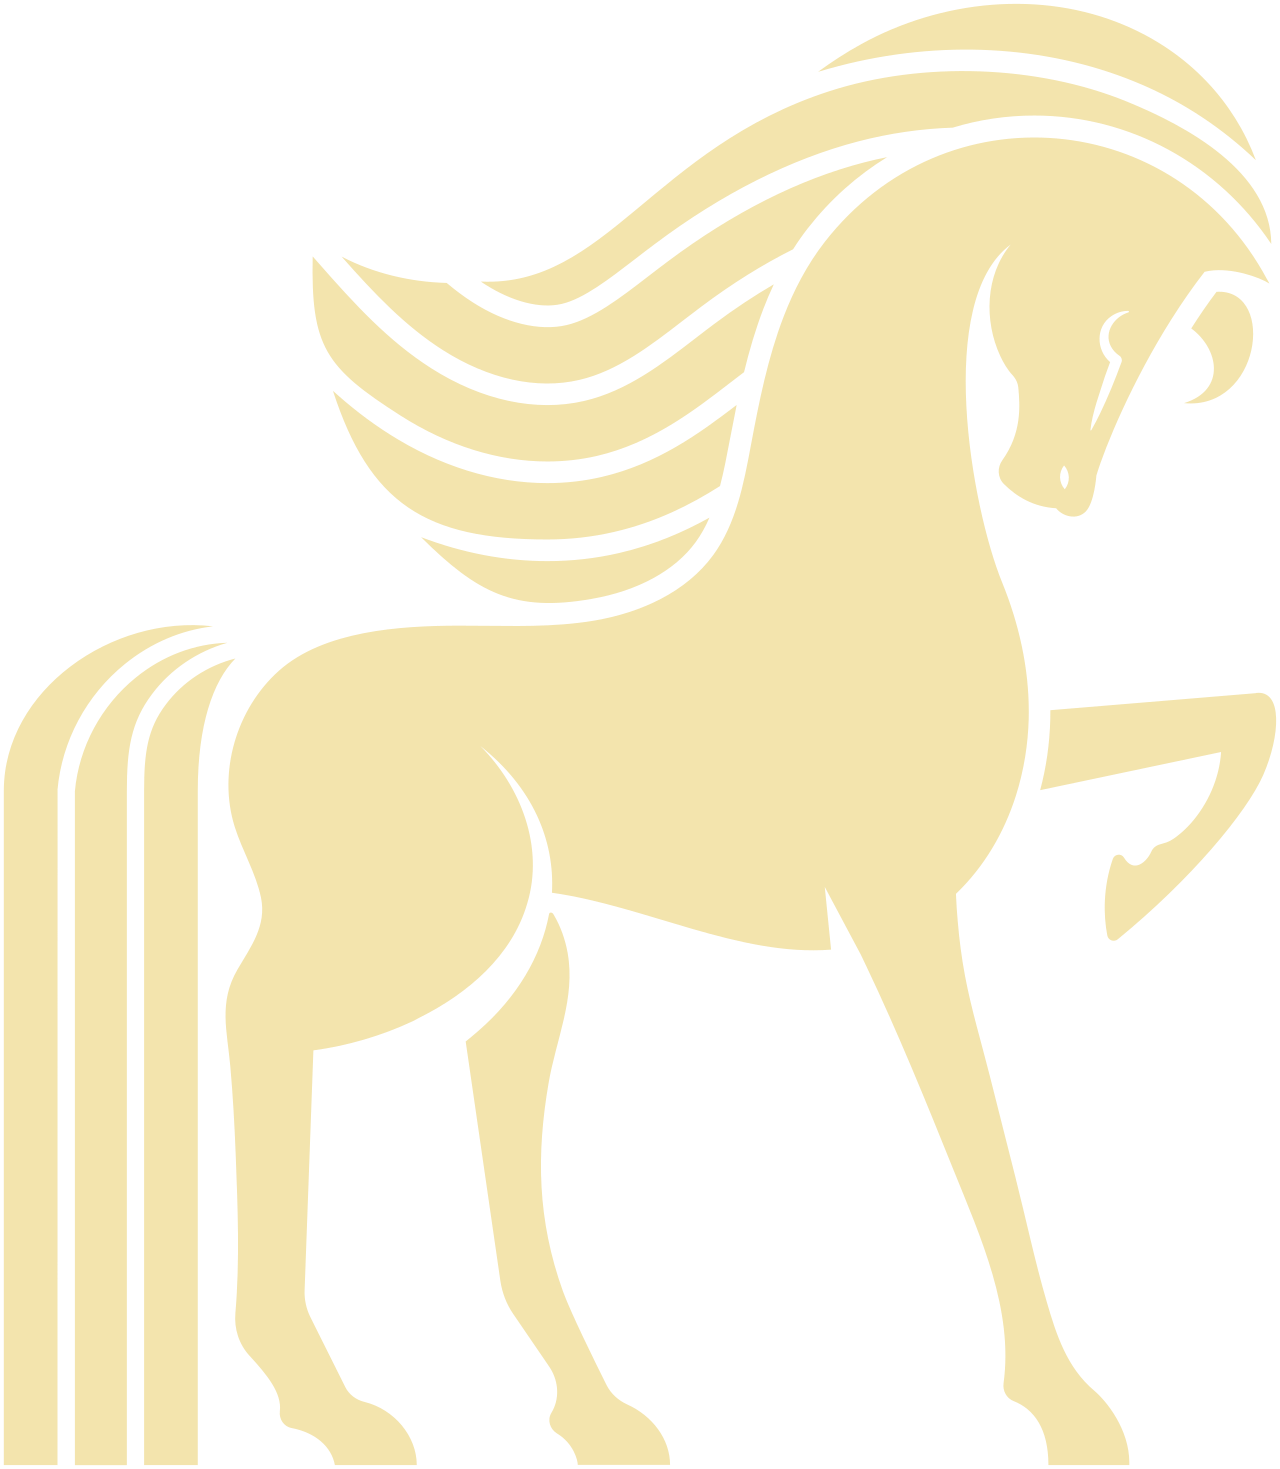 Equestrian Excellence's logo